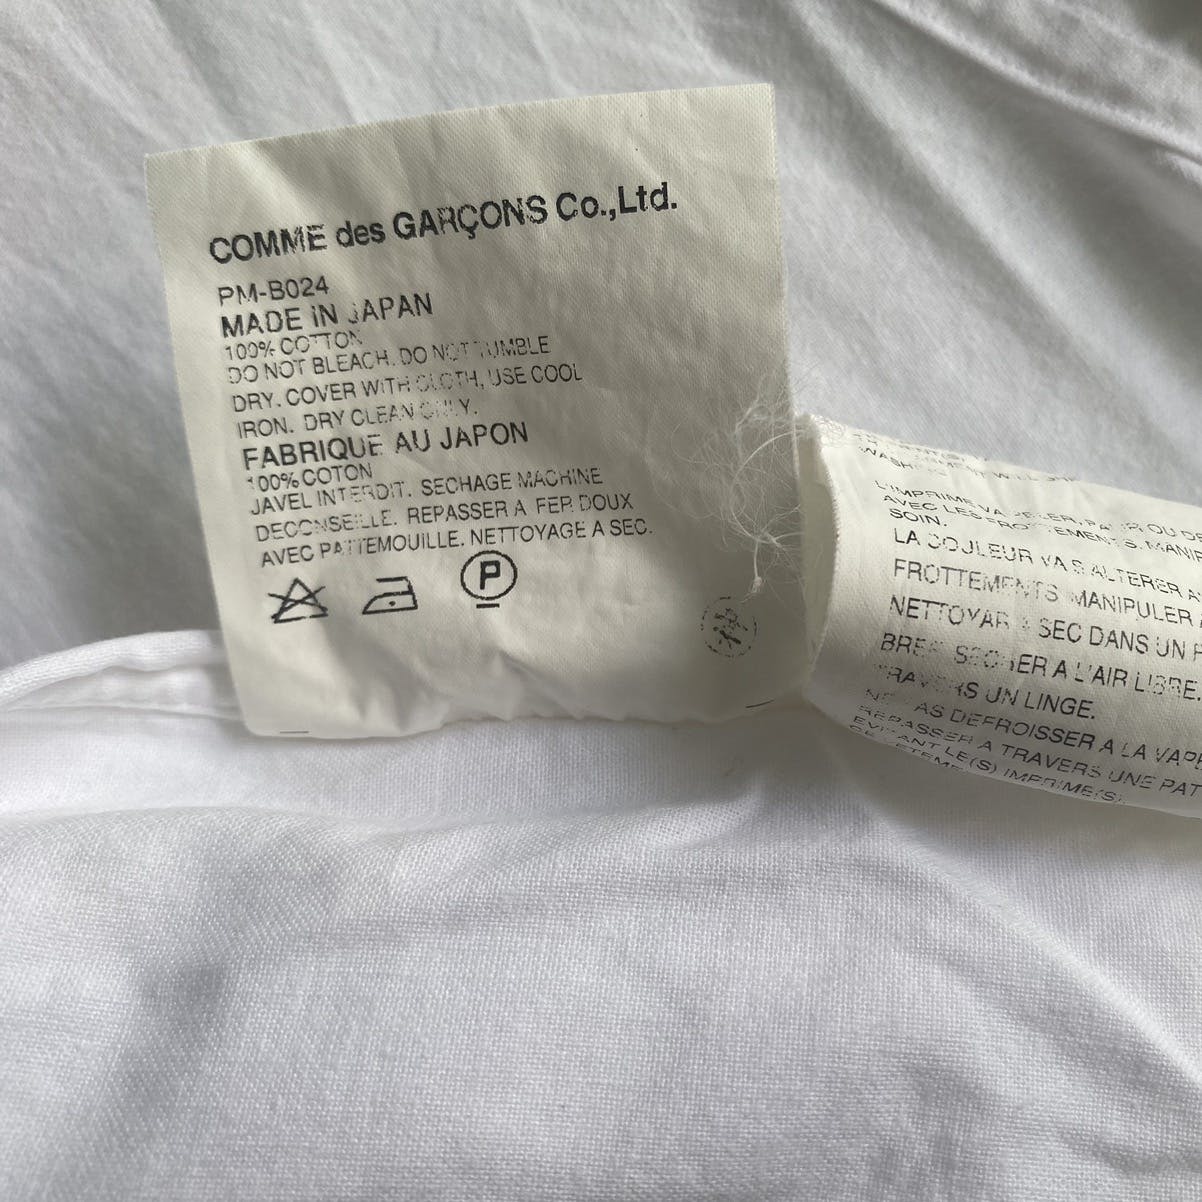 SS04 CDGHP France Route “Carole” Jacket - 7